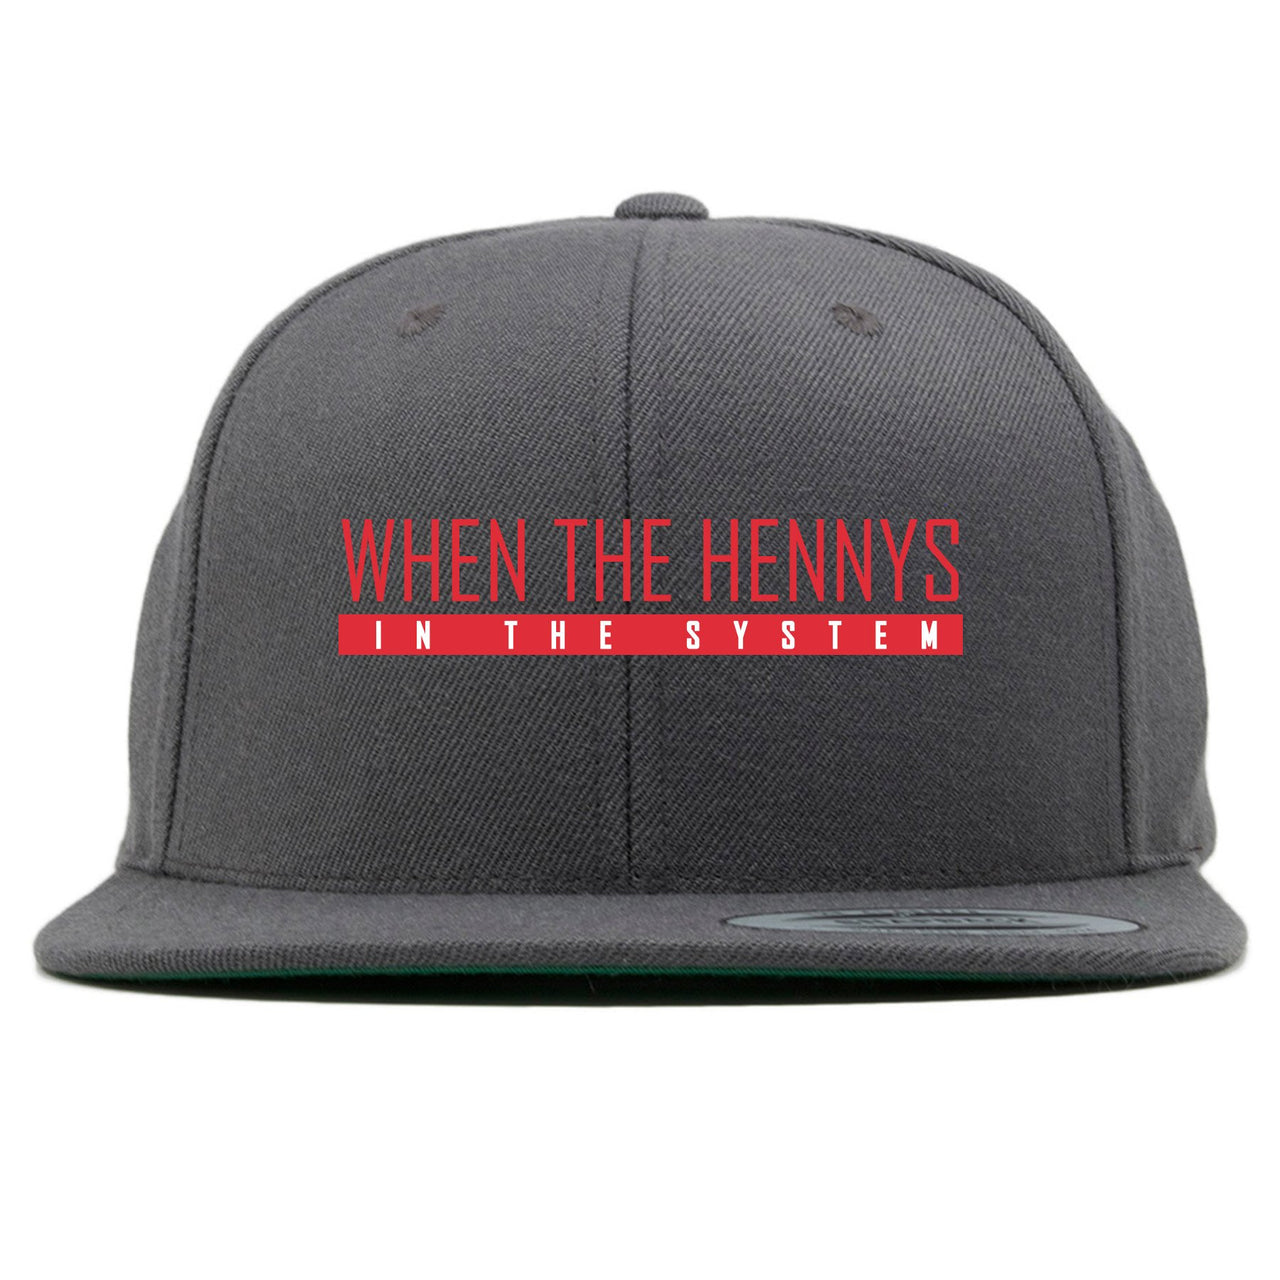 Bred 2019 4s Snapback | When the Hennys, Gray